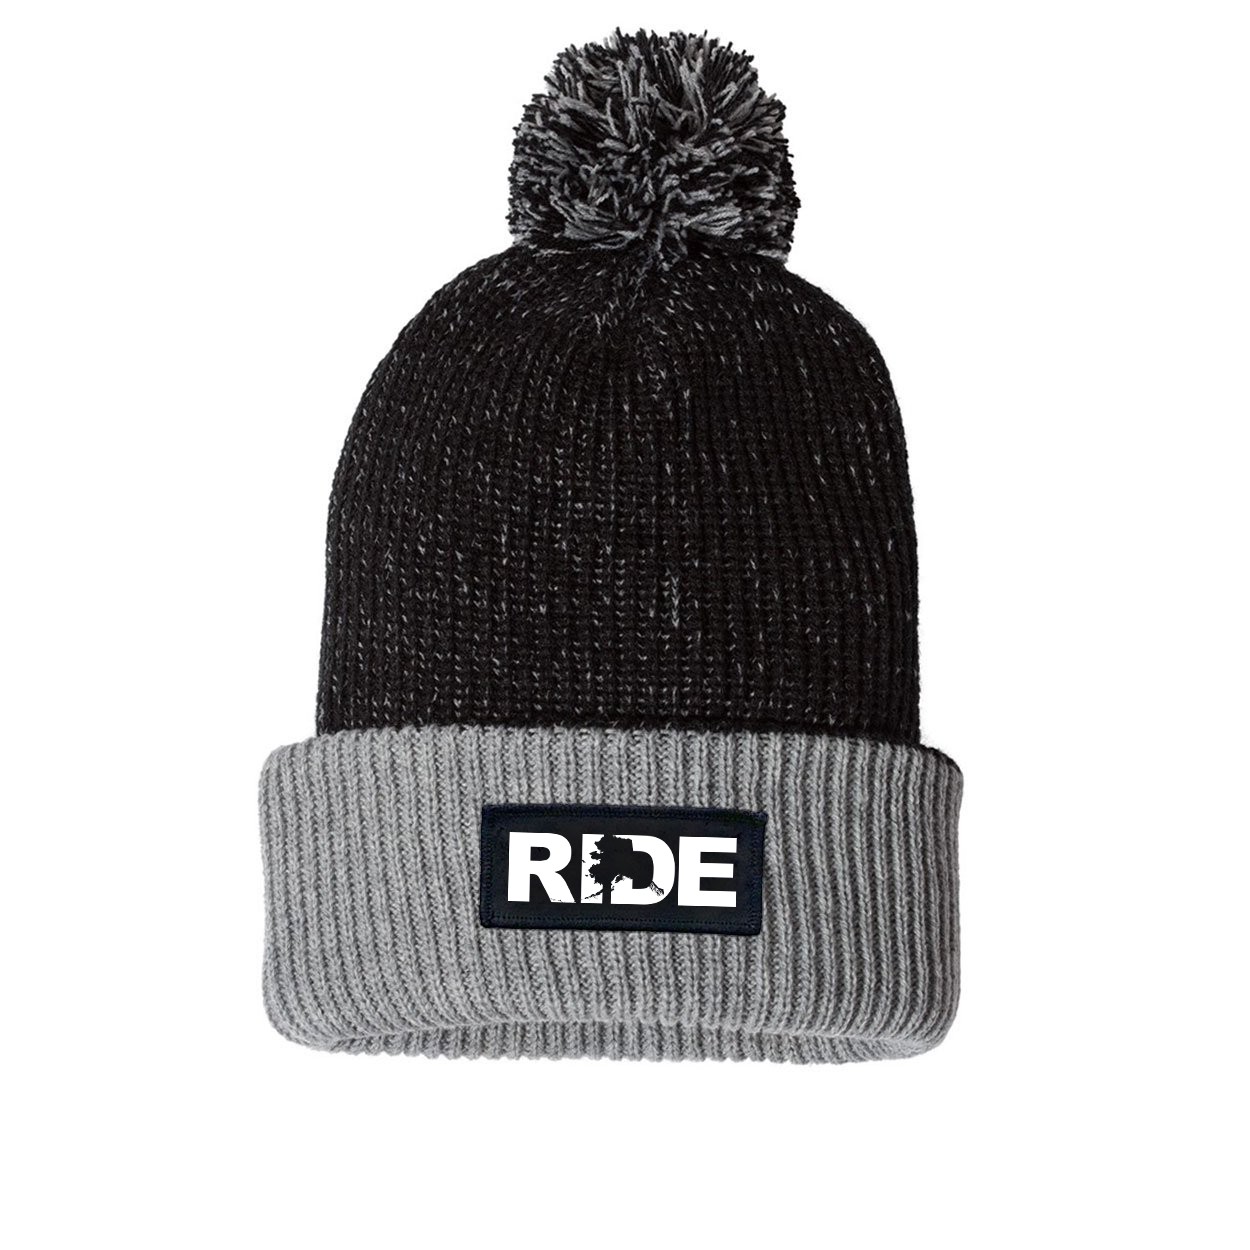 Ride Alaska Night Out Woven Patch Roll Up Pom Knit Beanie Black/Gray (White Logo)